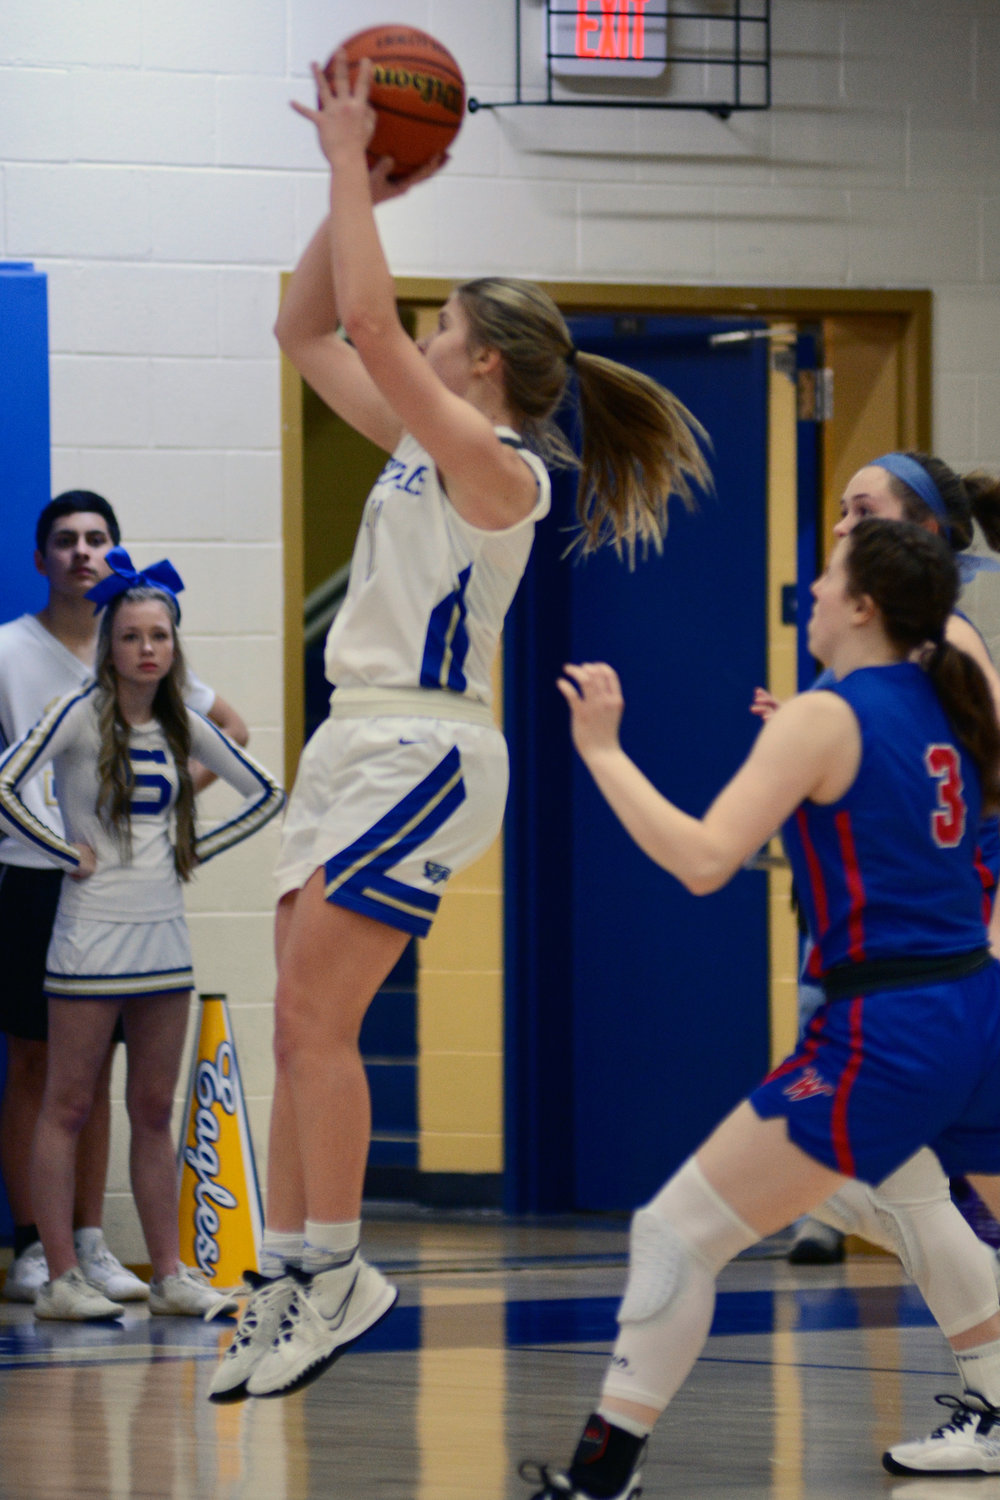 Eaglette sophomore Paige Blackburn had an excellent night shooting the basketball, scoring 18 points including 5-of-5 from 3-point range against Warren County.